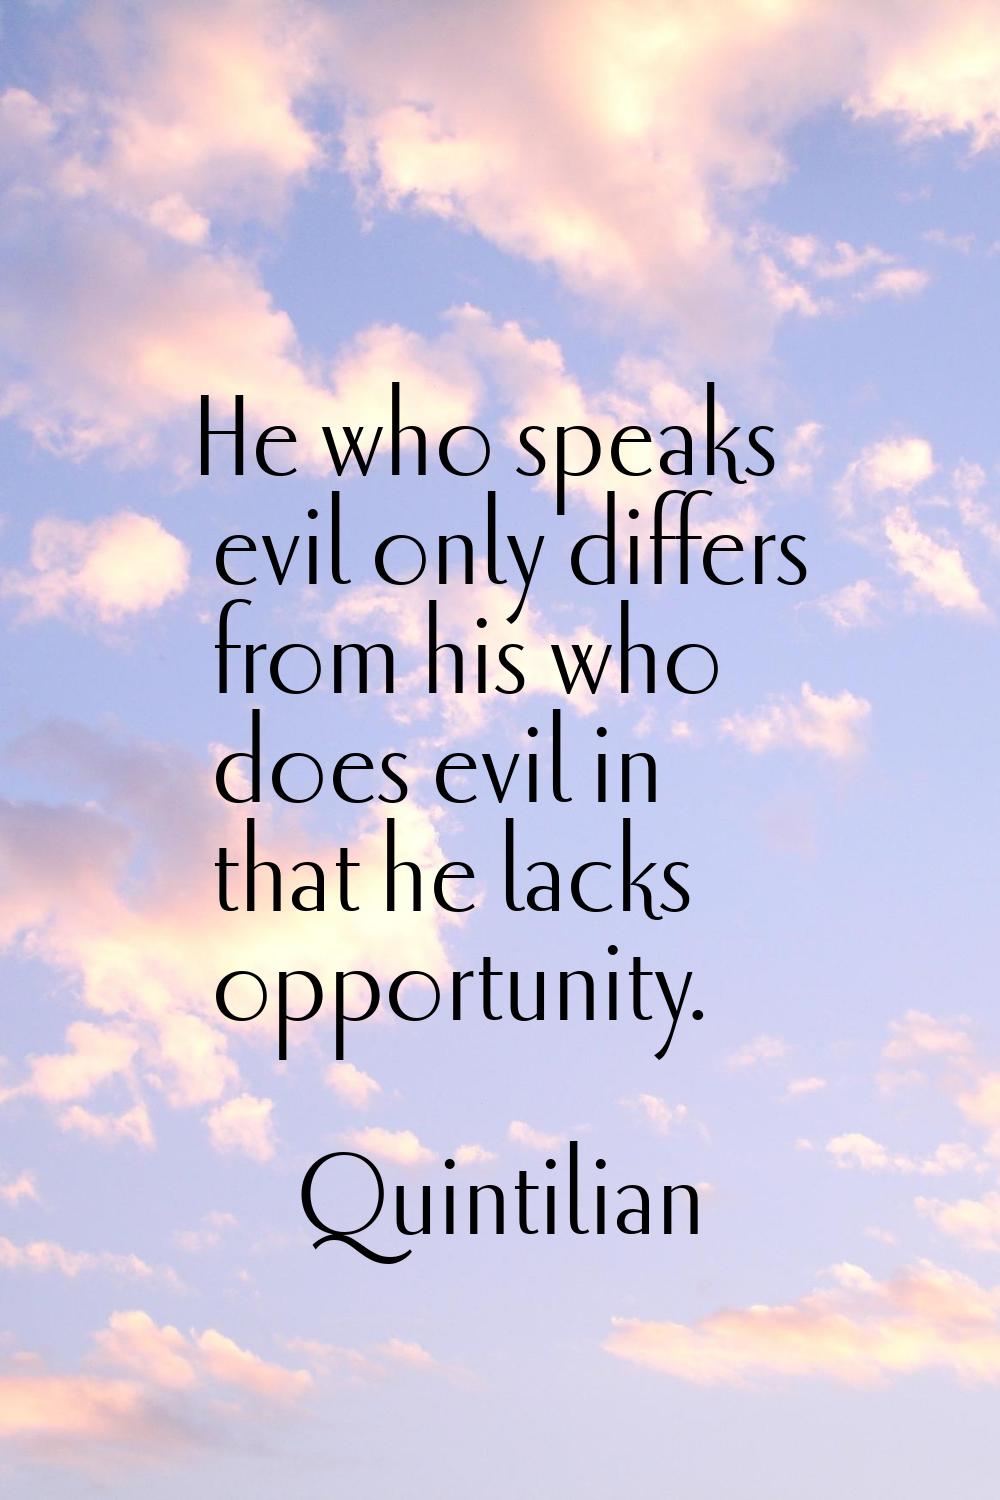 He who speaks evil only differs from his who does evil in that he lacks opportunity.